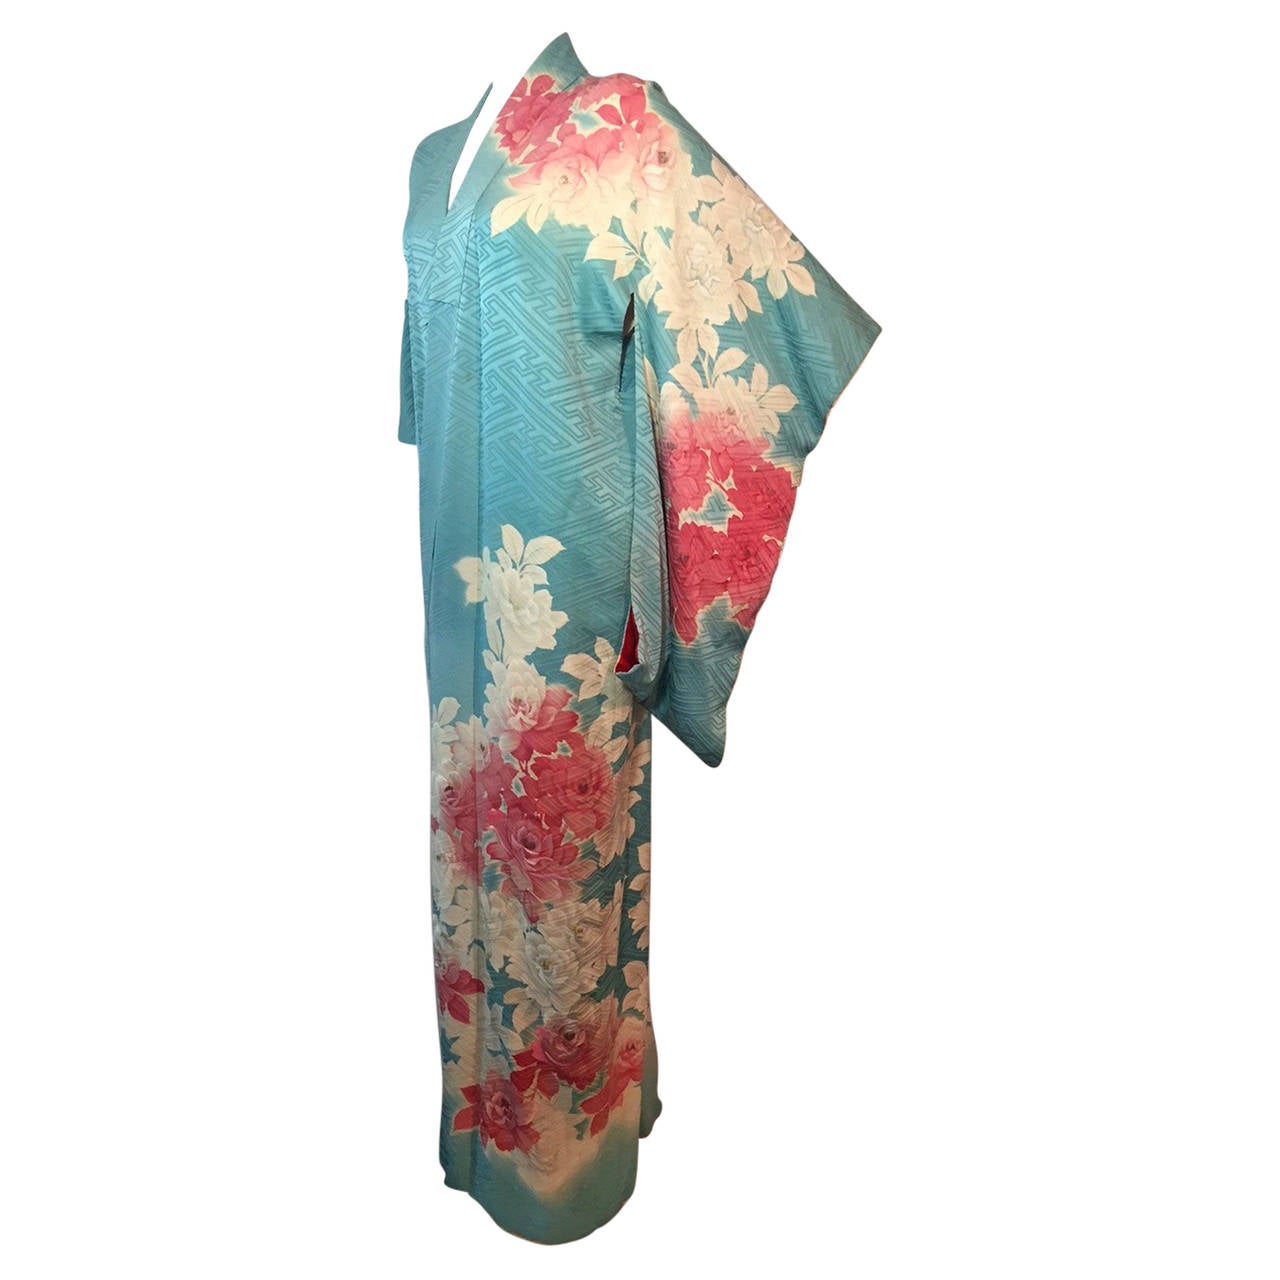 1930s Sky Blue Silk Jacquard Kimono with Pink and White Floral Print